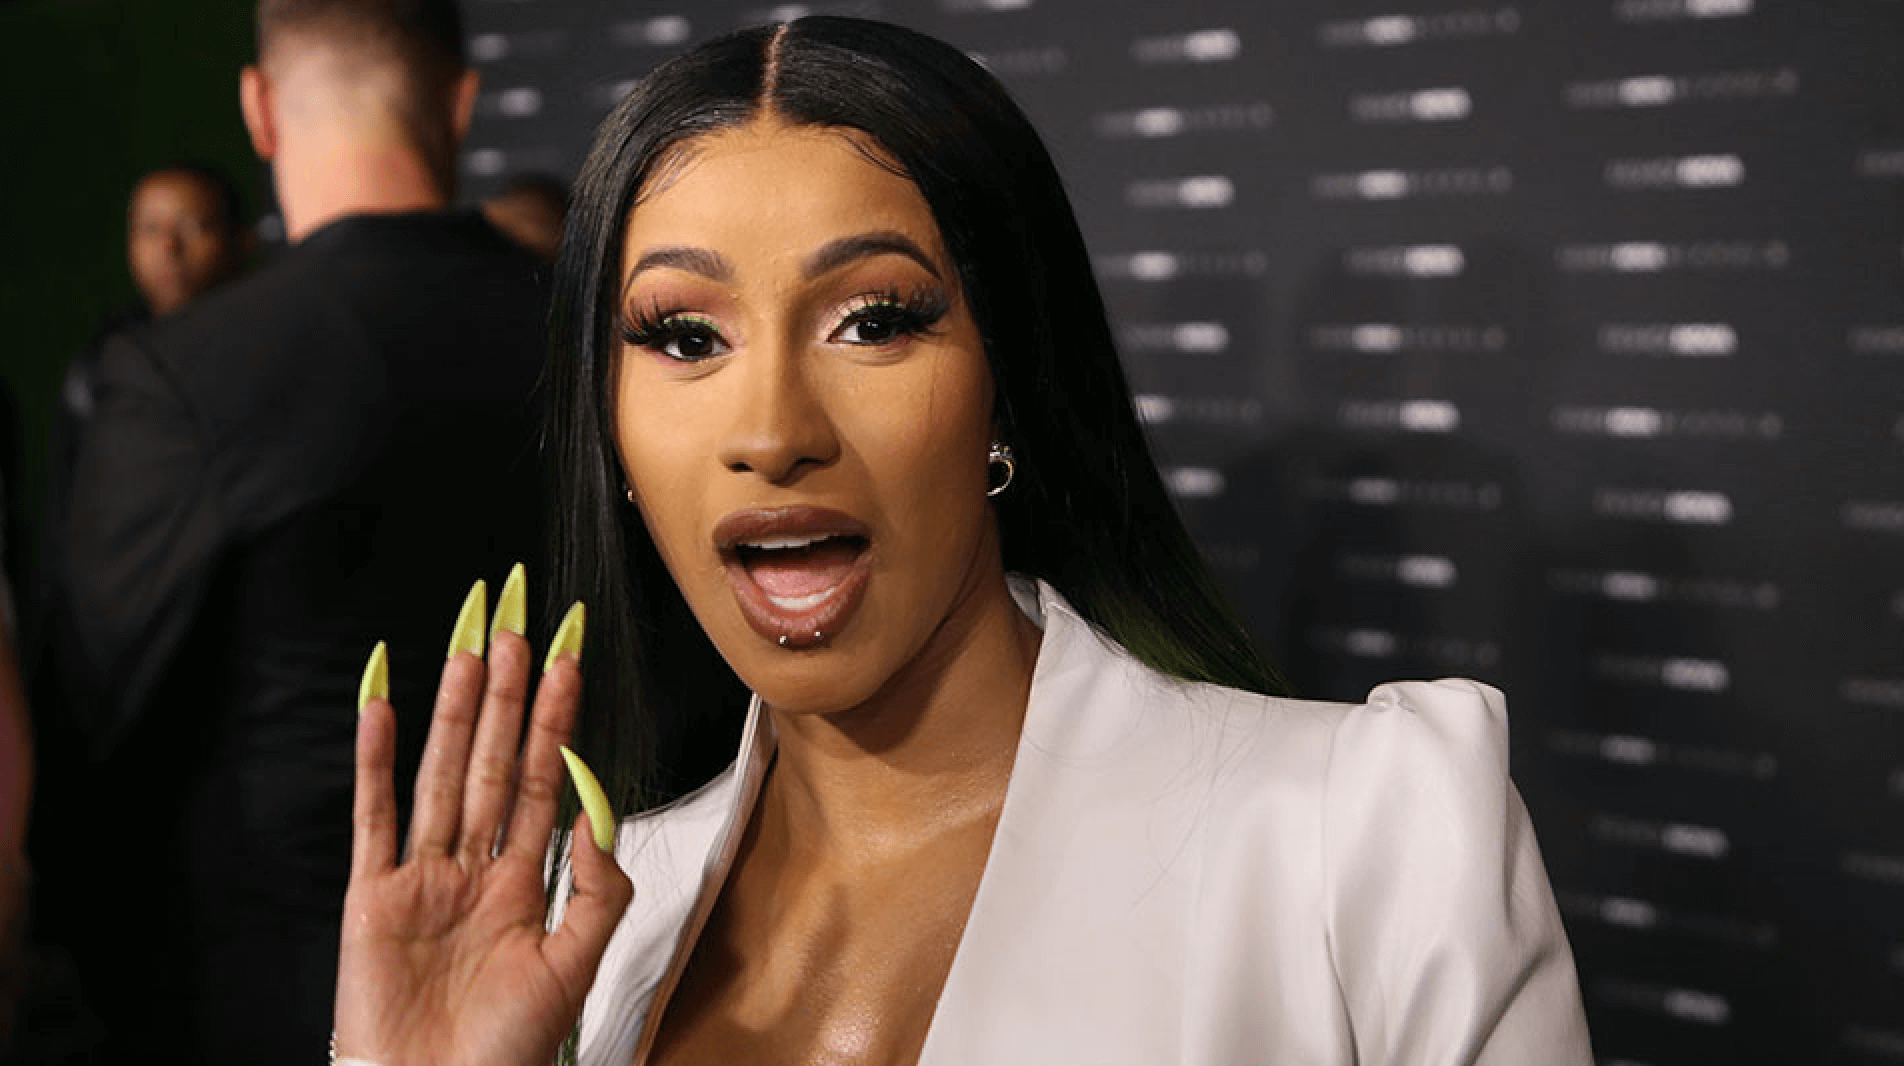 Pregnant Cardi B Rushed To The Hospital After Getting Into ‘Fight’ With Former ‘Love & Hip Hop’ Star!